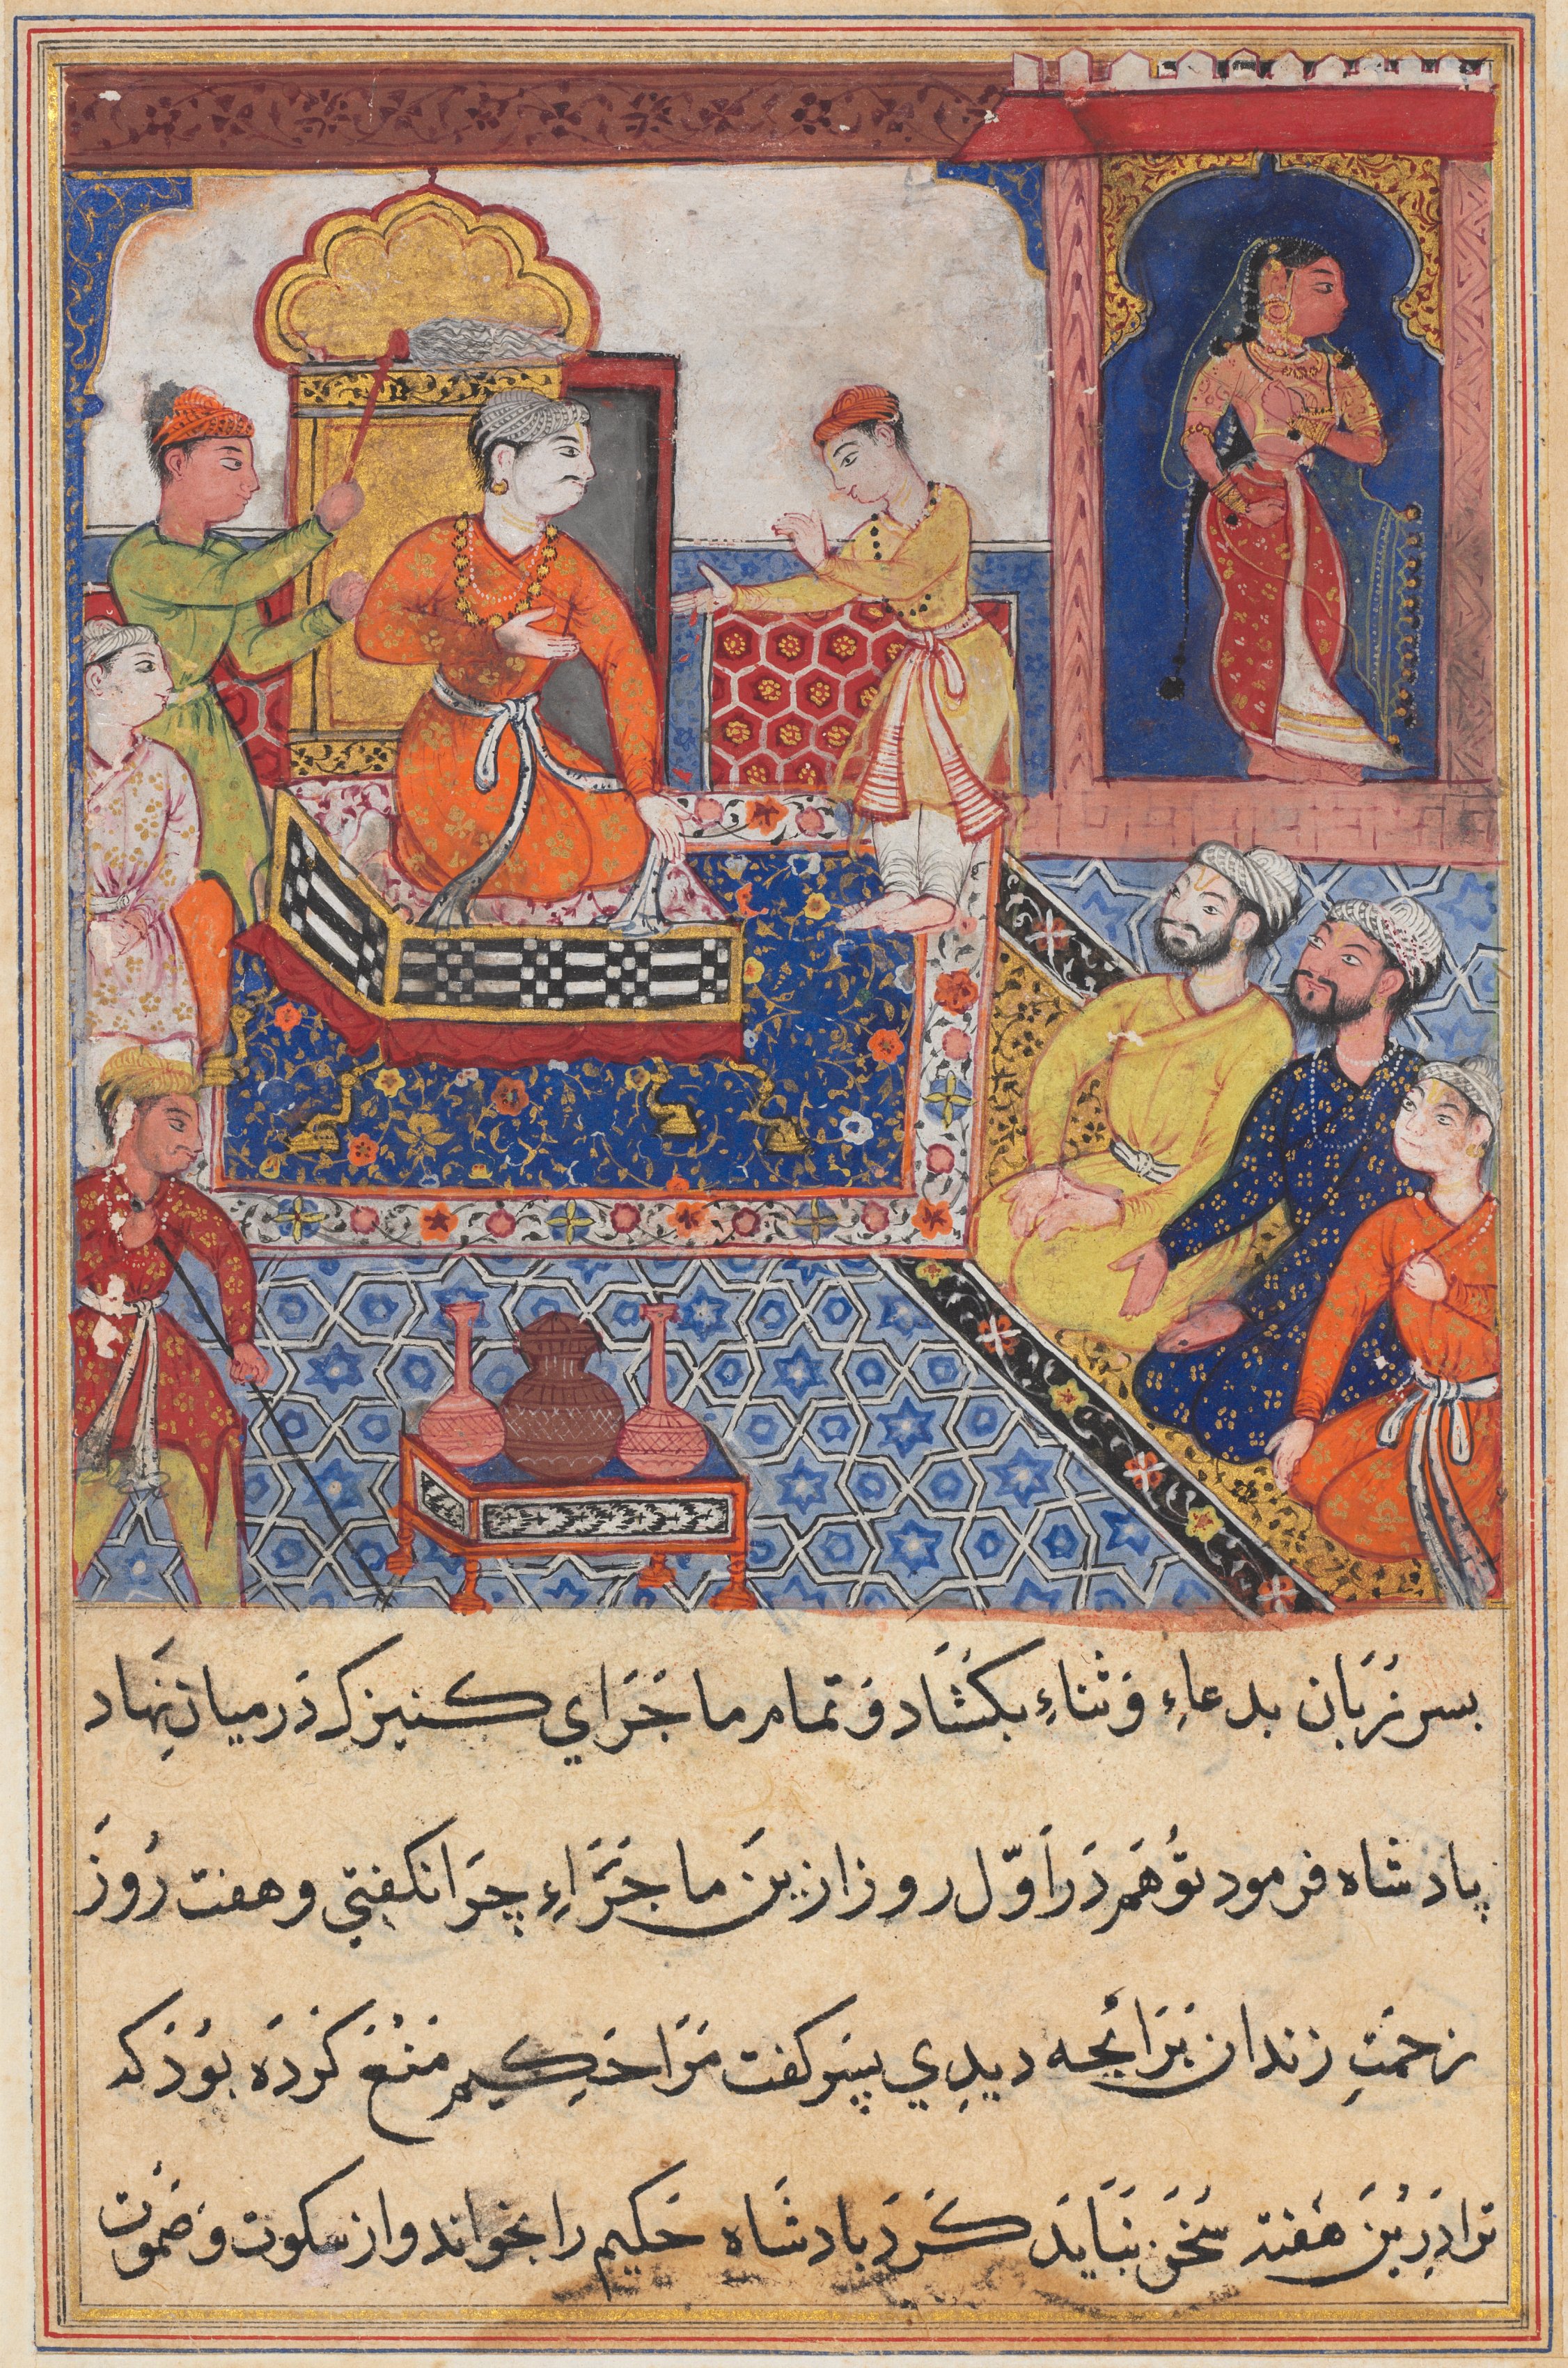 The young prince recounts his experiences to his father, the king, from a Tuti-nama (Tales of a Parrot): Eighth Night